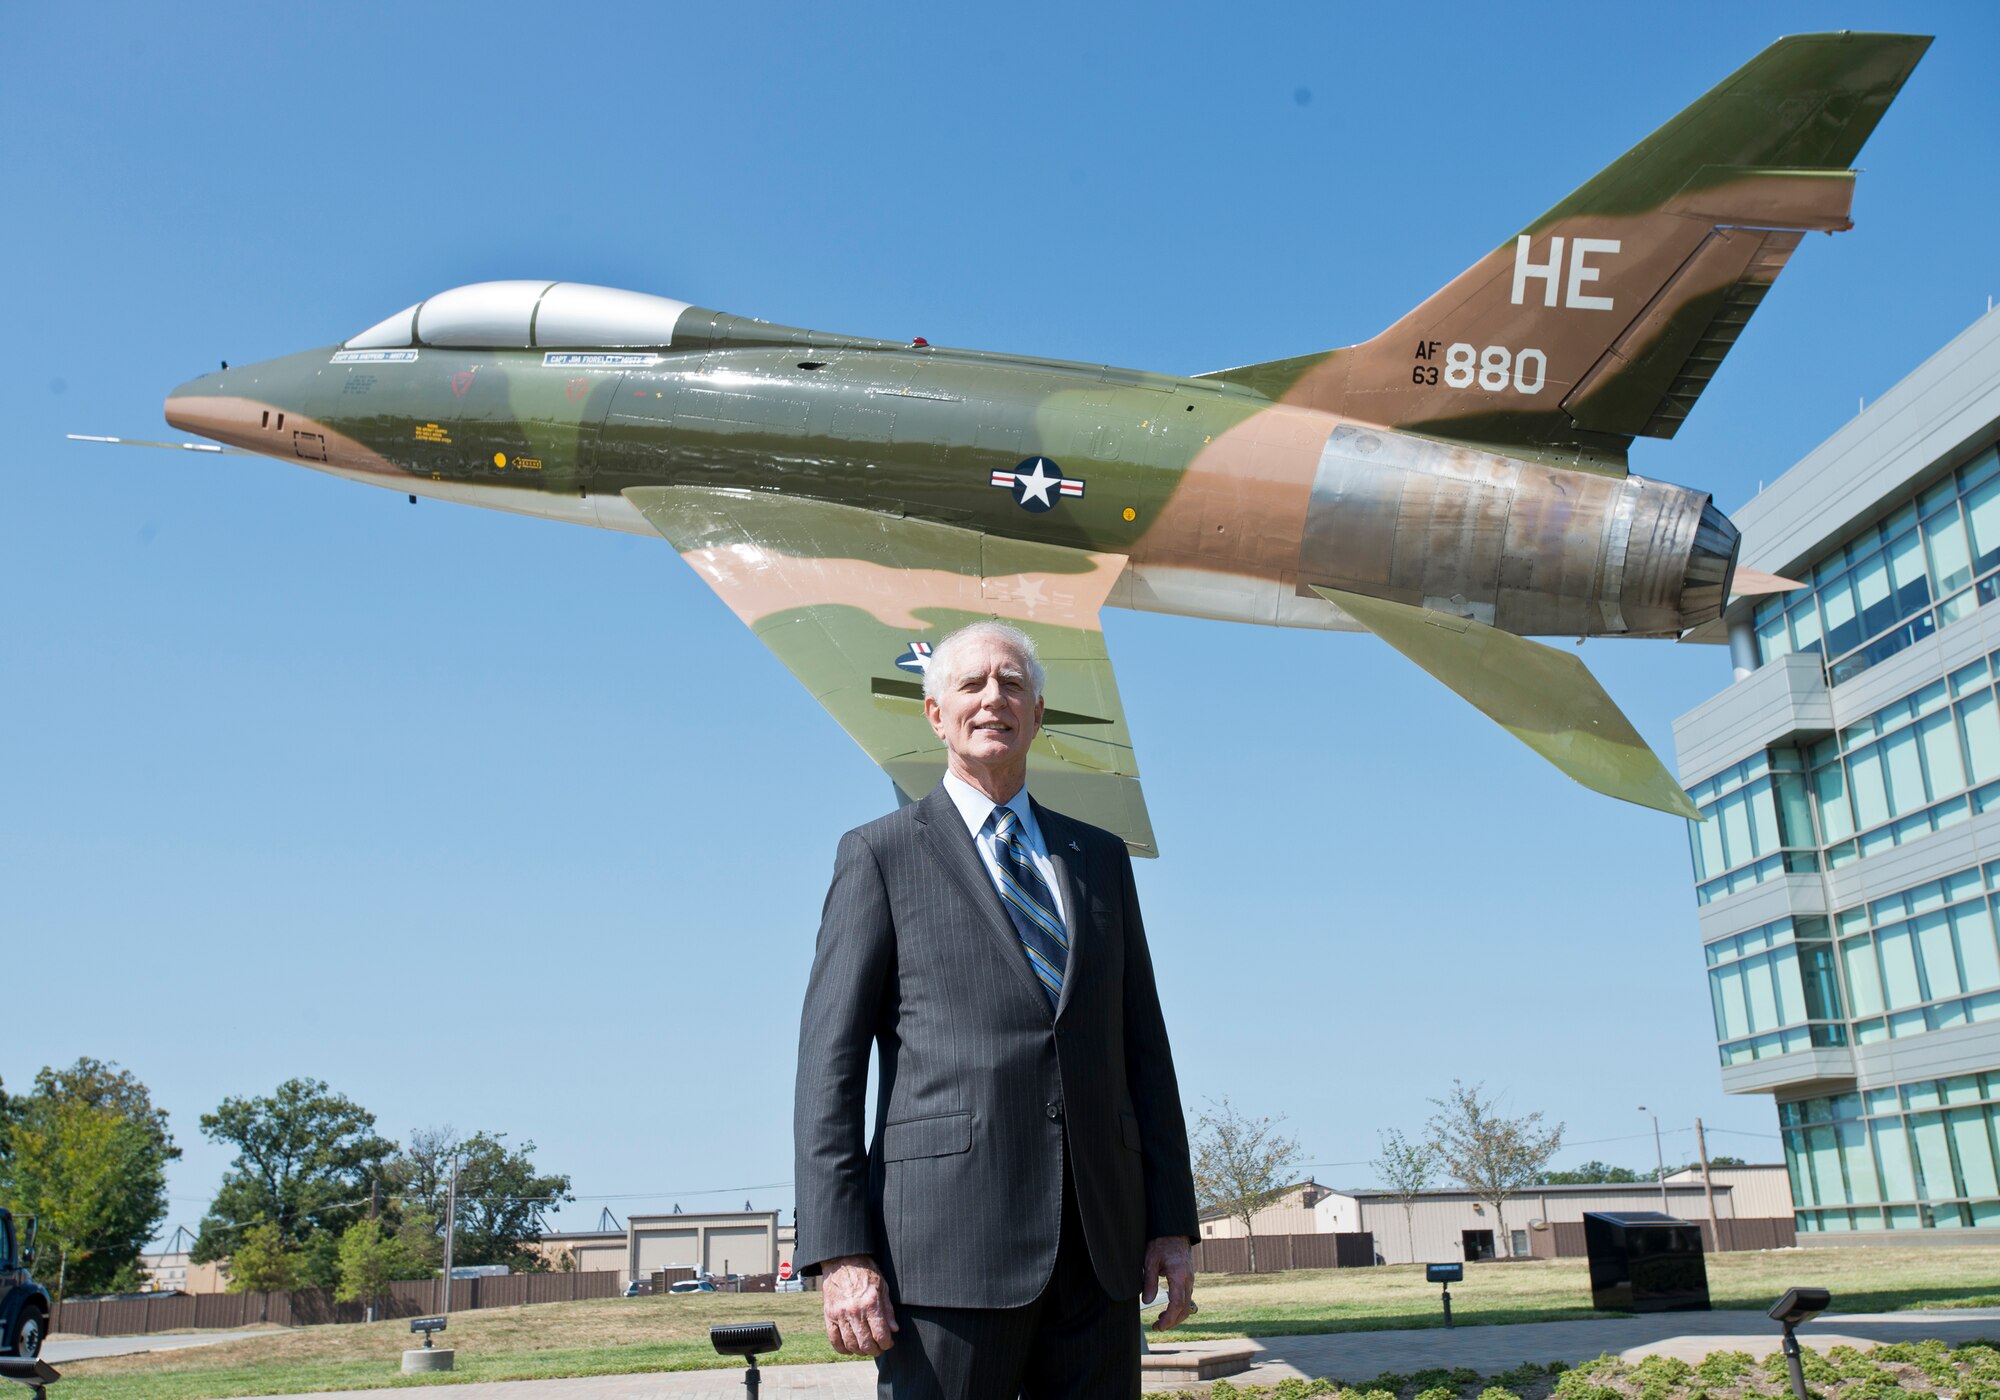 Retired Maj. Gen. Donald Shepperd, former Air National Guard director, poses for a photo at a dedication ceremony for an F-100 Super Sabre static display at the Air National Guard Readiness Center on Joint Base Andrews, Md., Spetember 13, 2016. The aircraft is dedicated to ANG members killed, missing in action or wounded in the Vietnam War, and to the career of retired Maj. Gen. Donald W. Shepperd, who served as director of the ANG from 1994 to 1998 and flew 247 combat missions in Vietnam. (U.S. Air National Guard photo by Staff Sgt. John E. Hillier)